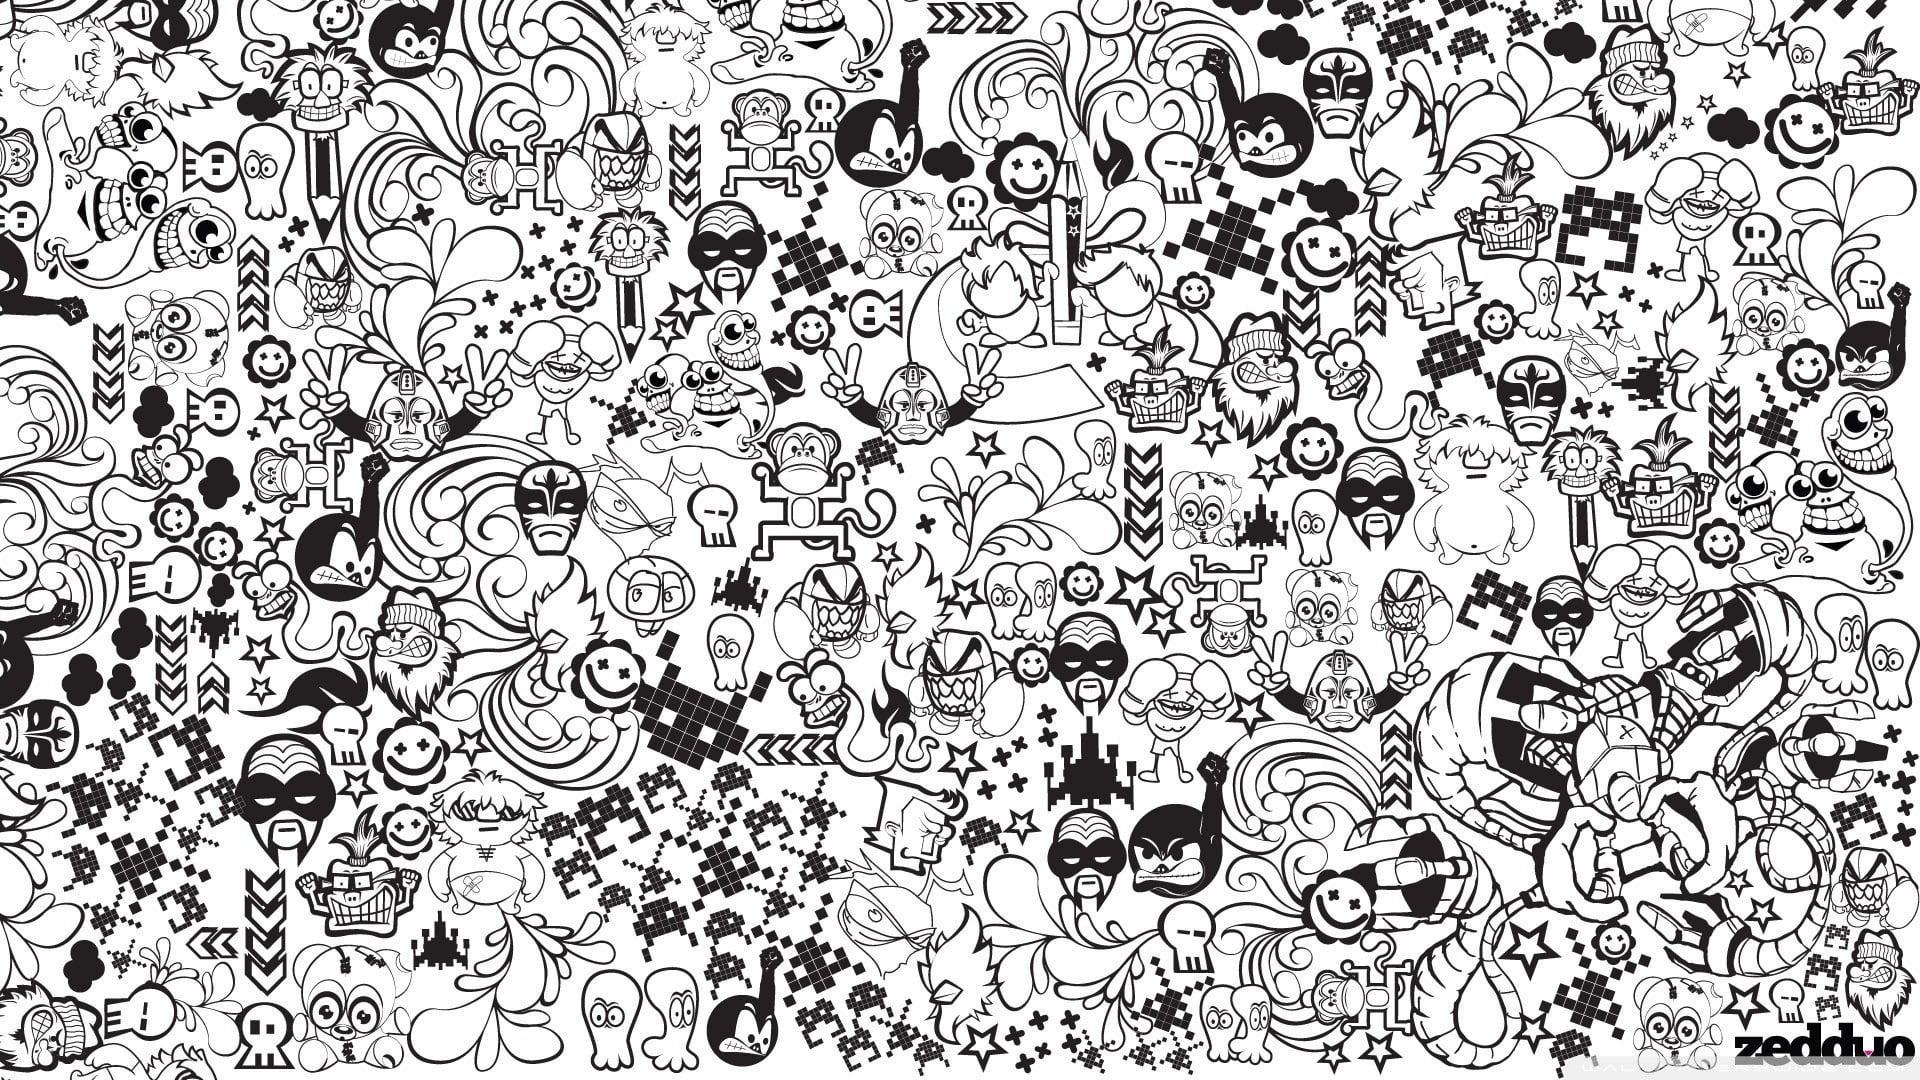 Black and White Doodle Wallpapers - Top Free Black and White Doodle ...